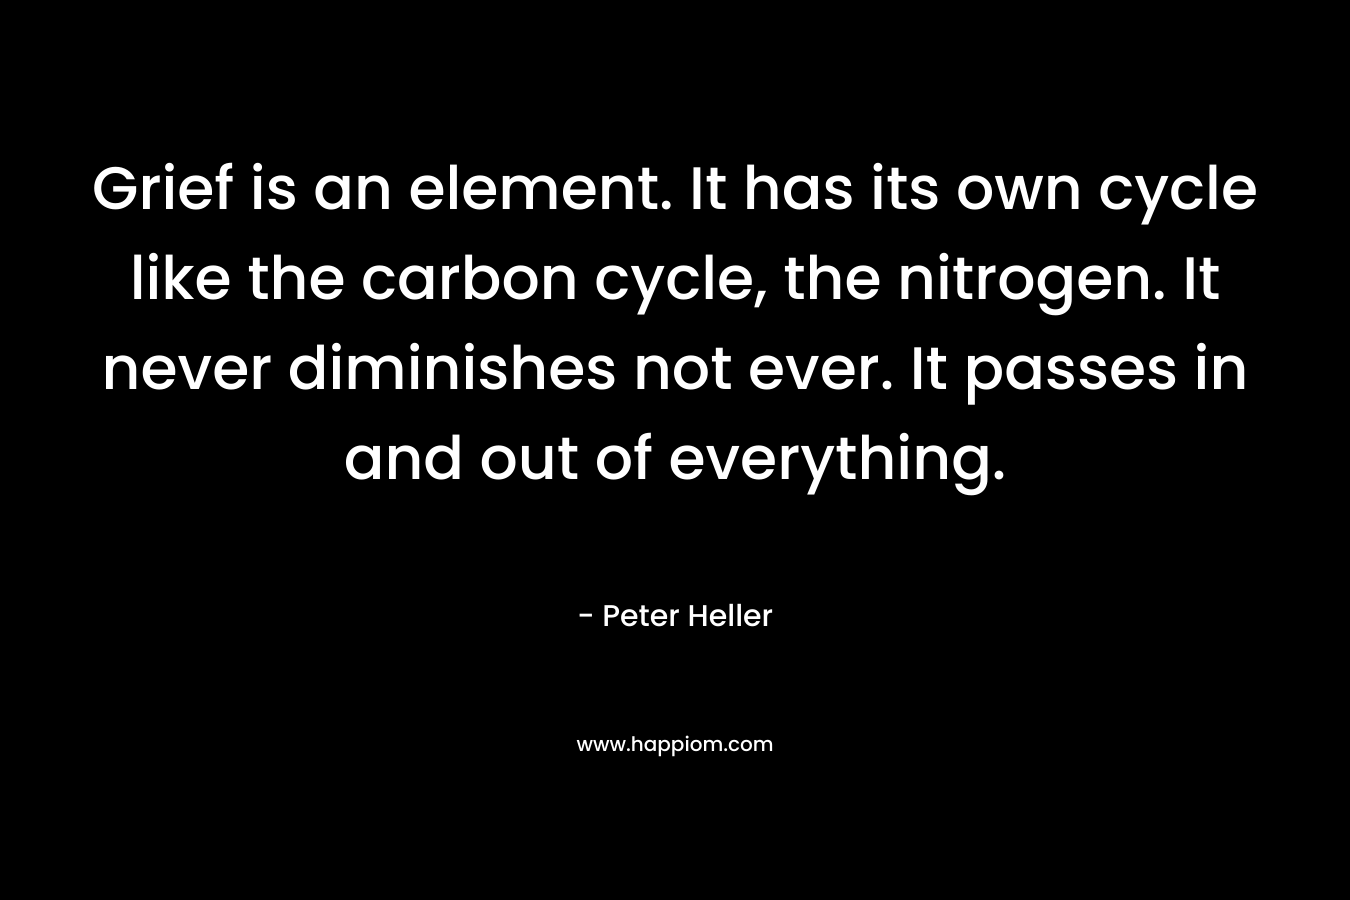 Grief is an element. It has its own cycle like the carbon cycle, the nitrogen. It never diminishes not ever. It passes in and out of everything.